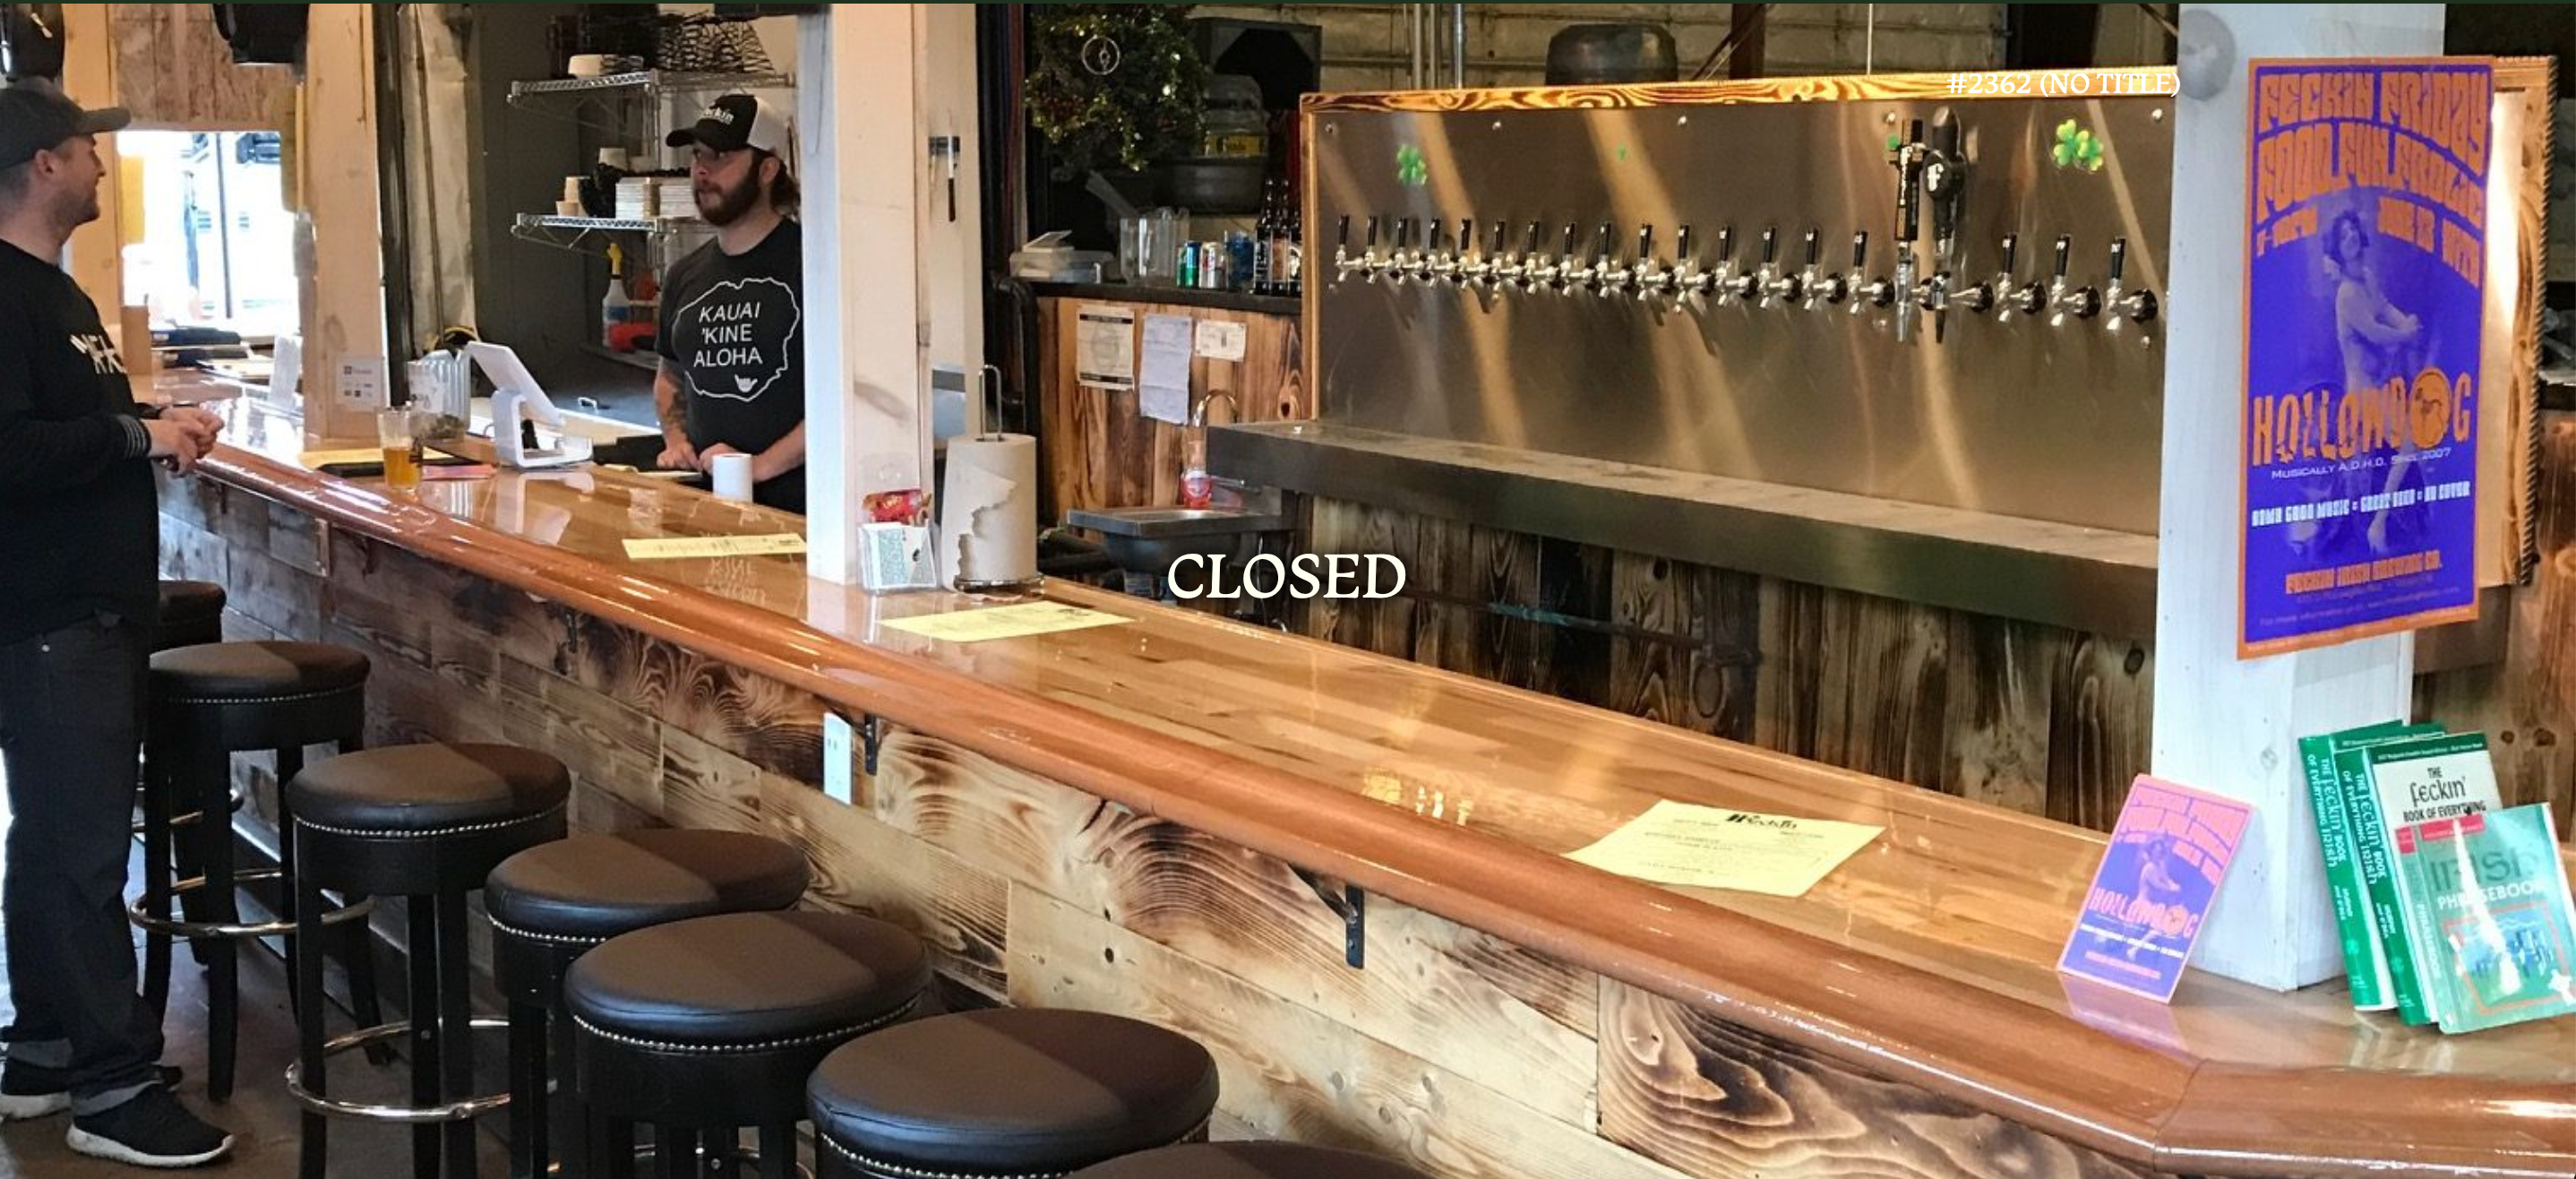 Feckin Brewery in Oregon City, Oregon has shuttered. (image courtesy of Feckin Brewery)